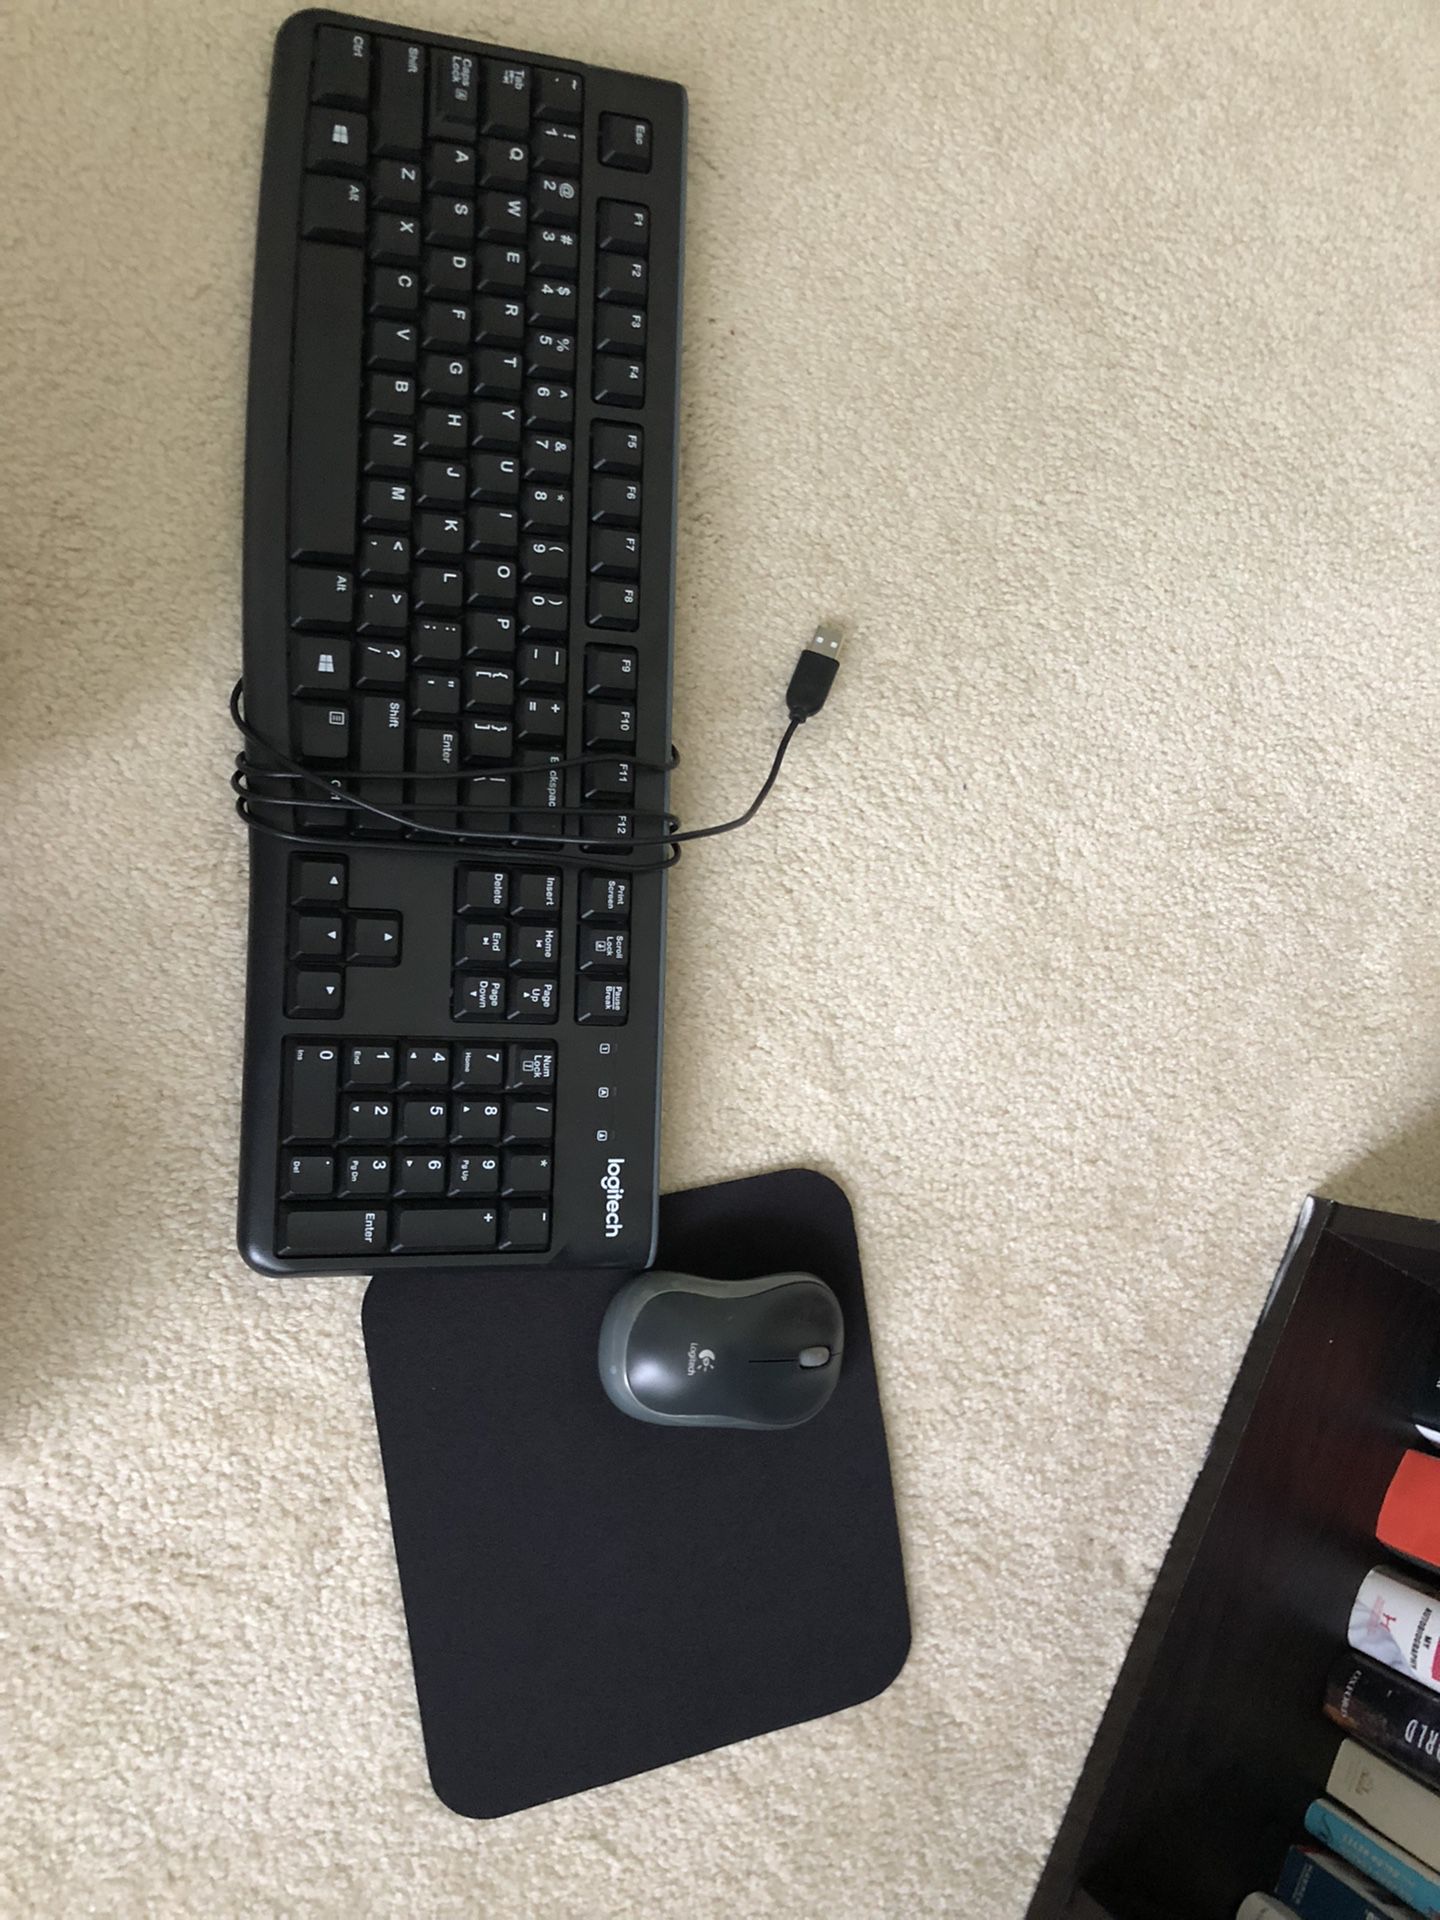 Keyboard And Mouse 